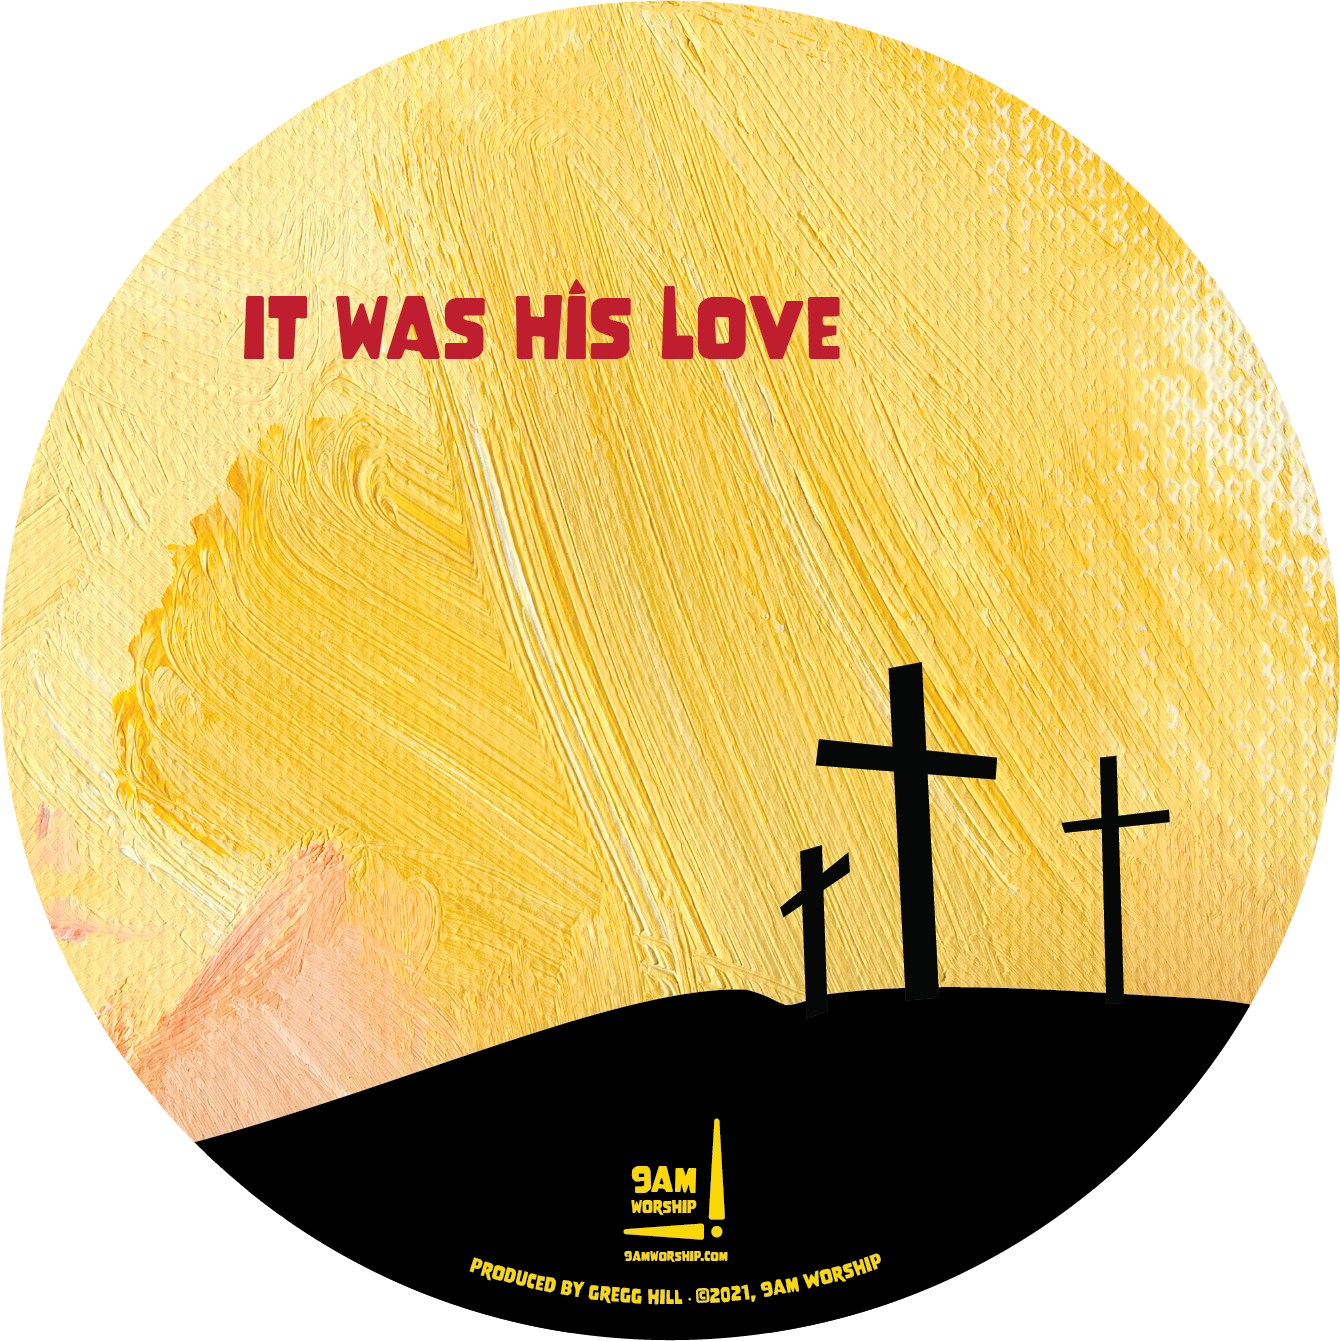 Album disc image for "it was His Love" by 9am worship